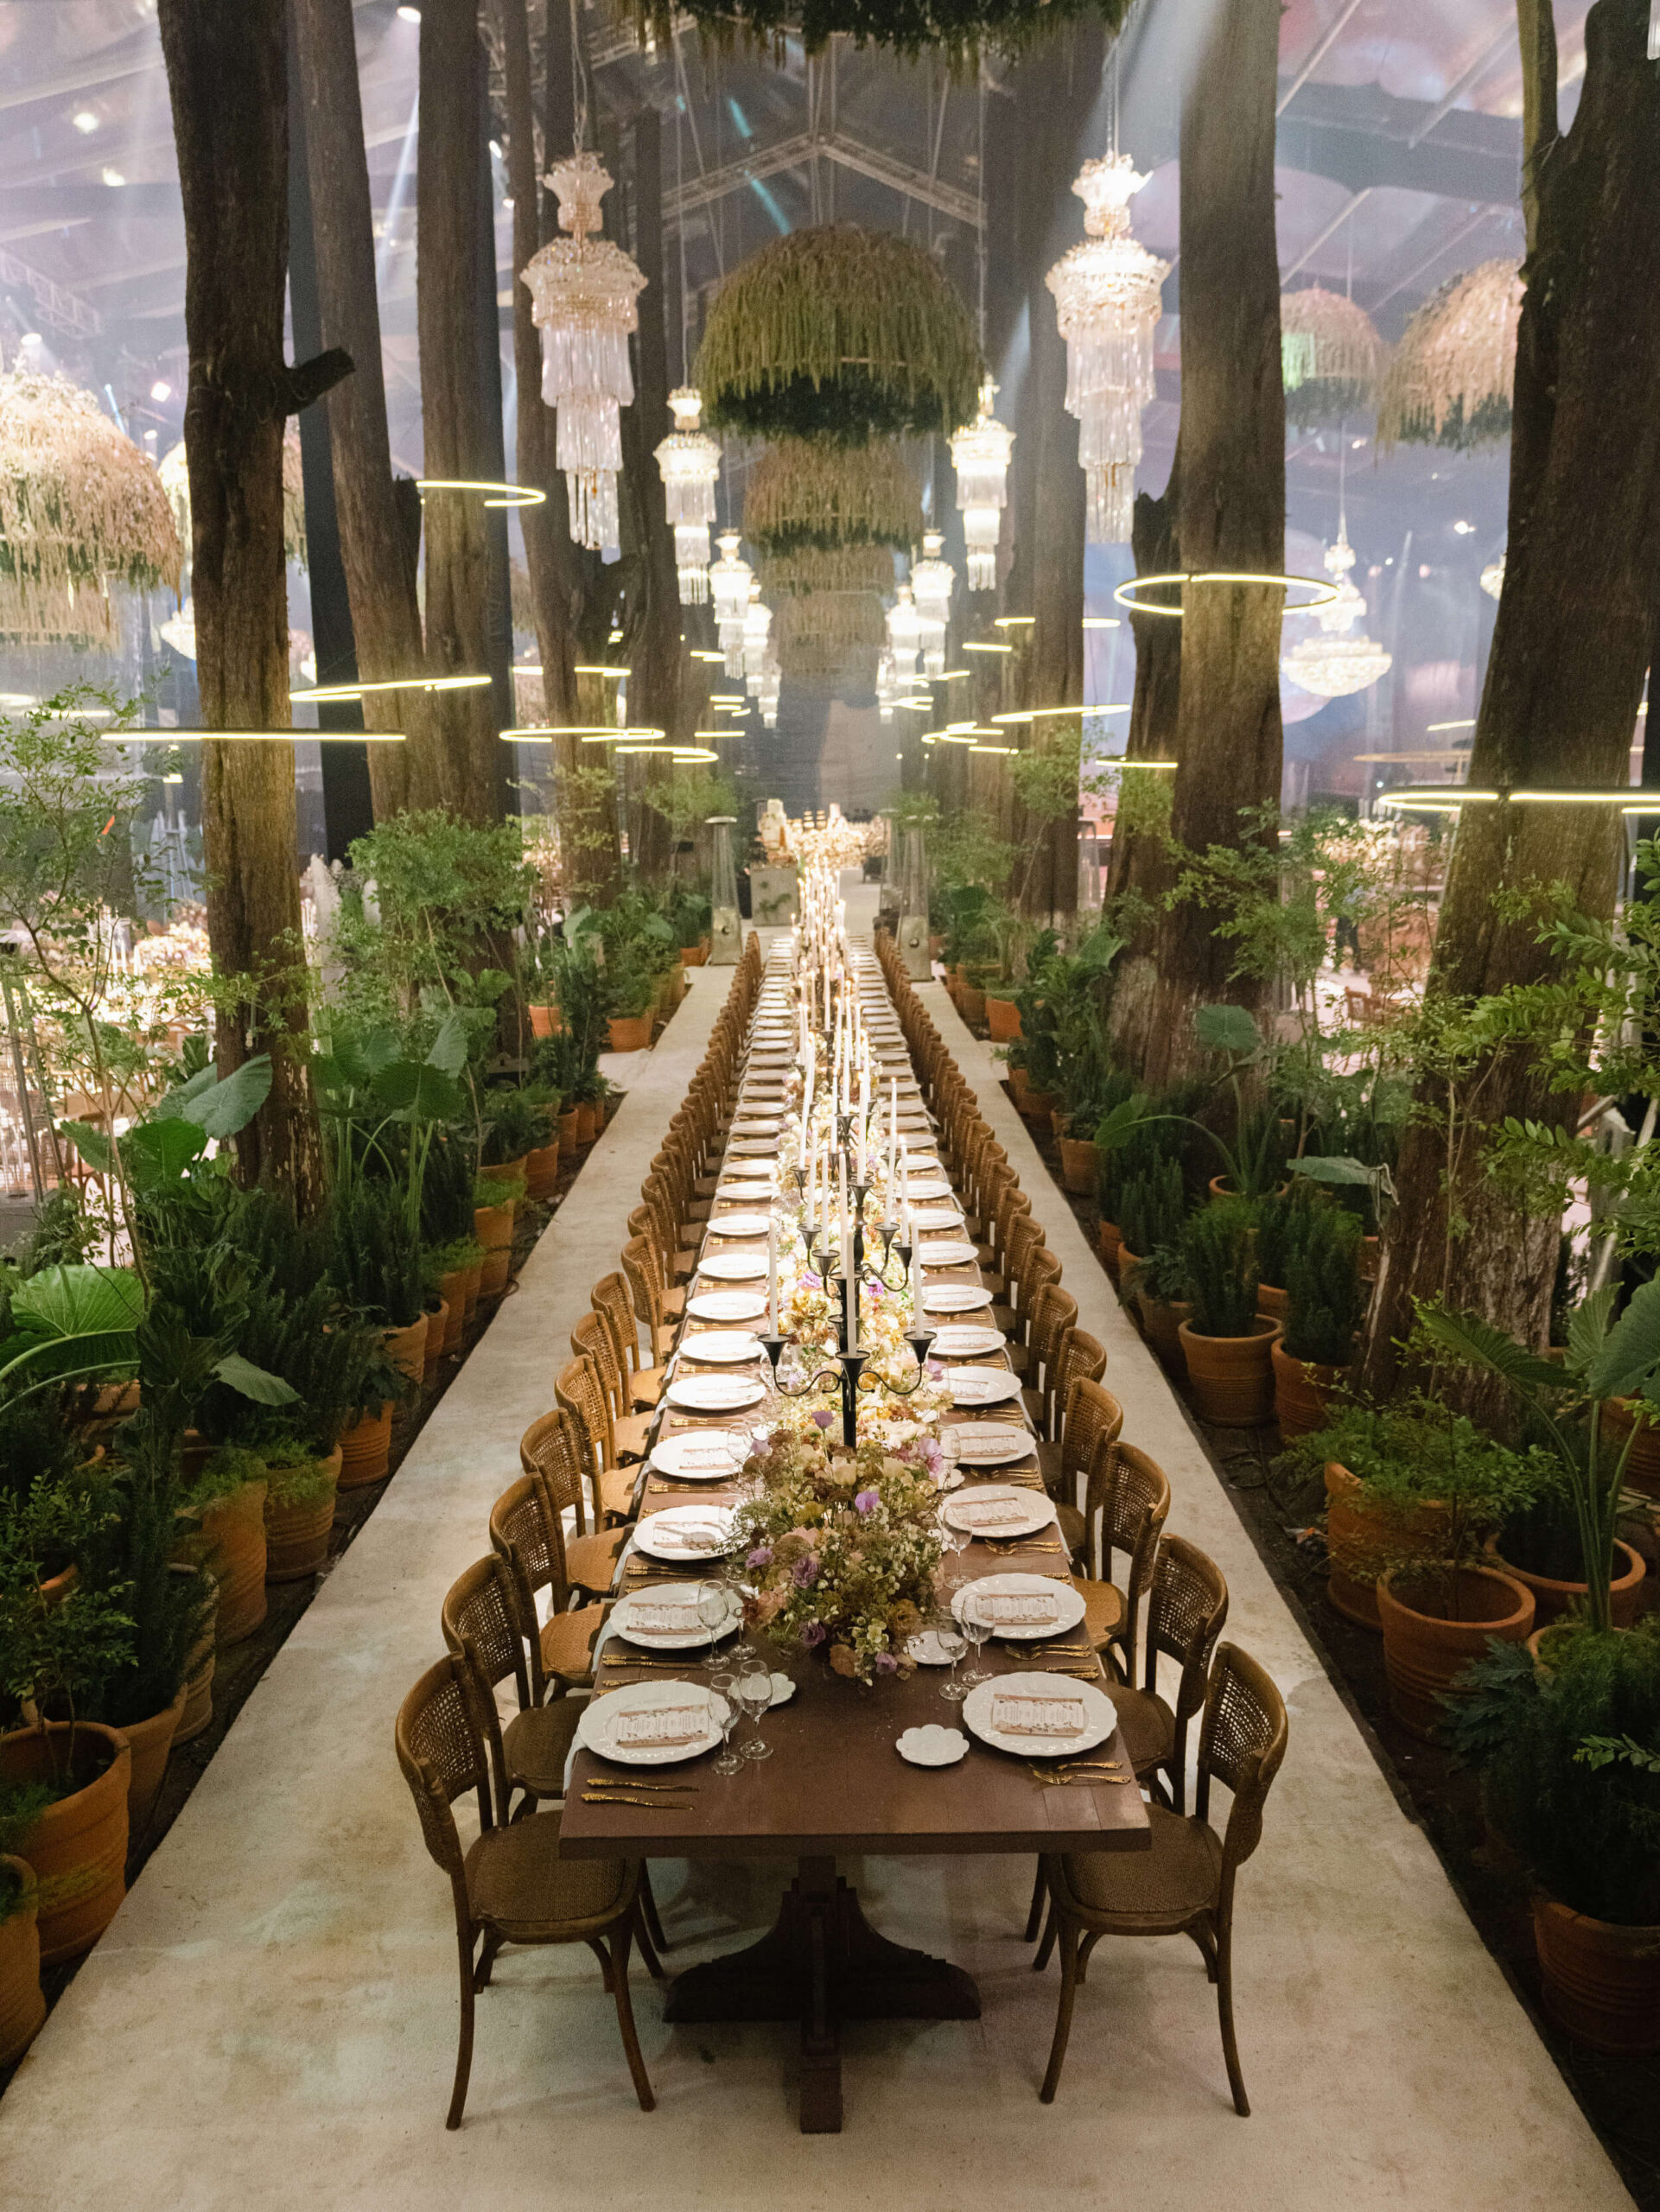 The reception area with a long table surrounded by halo-light encircled trees, with moss and crystal chandeliers hanging overhead